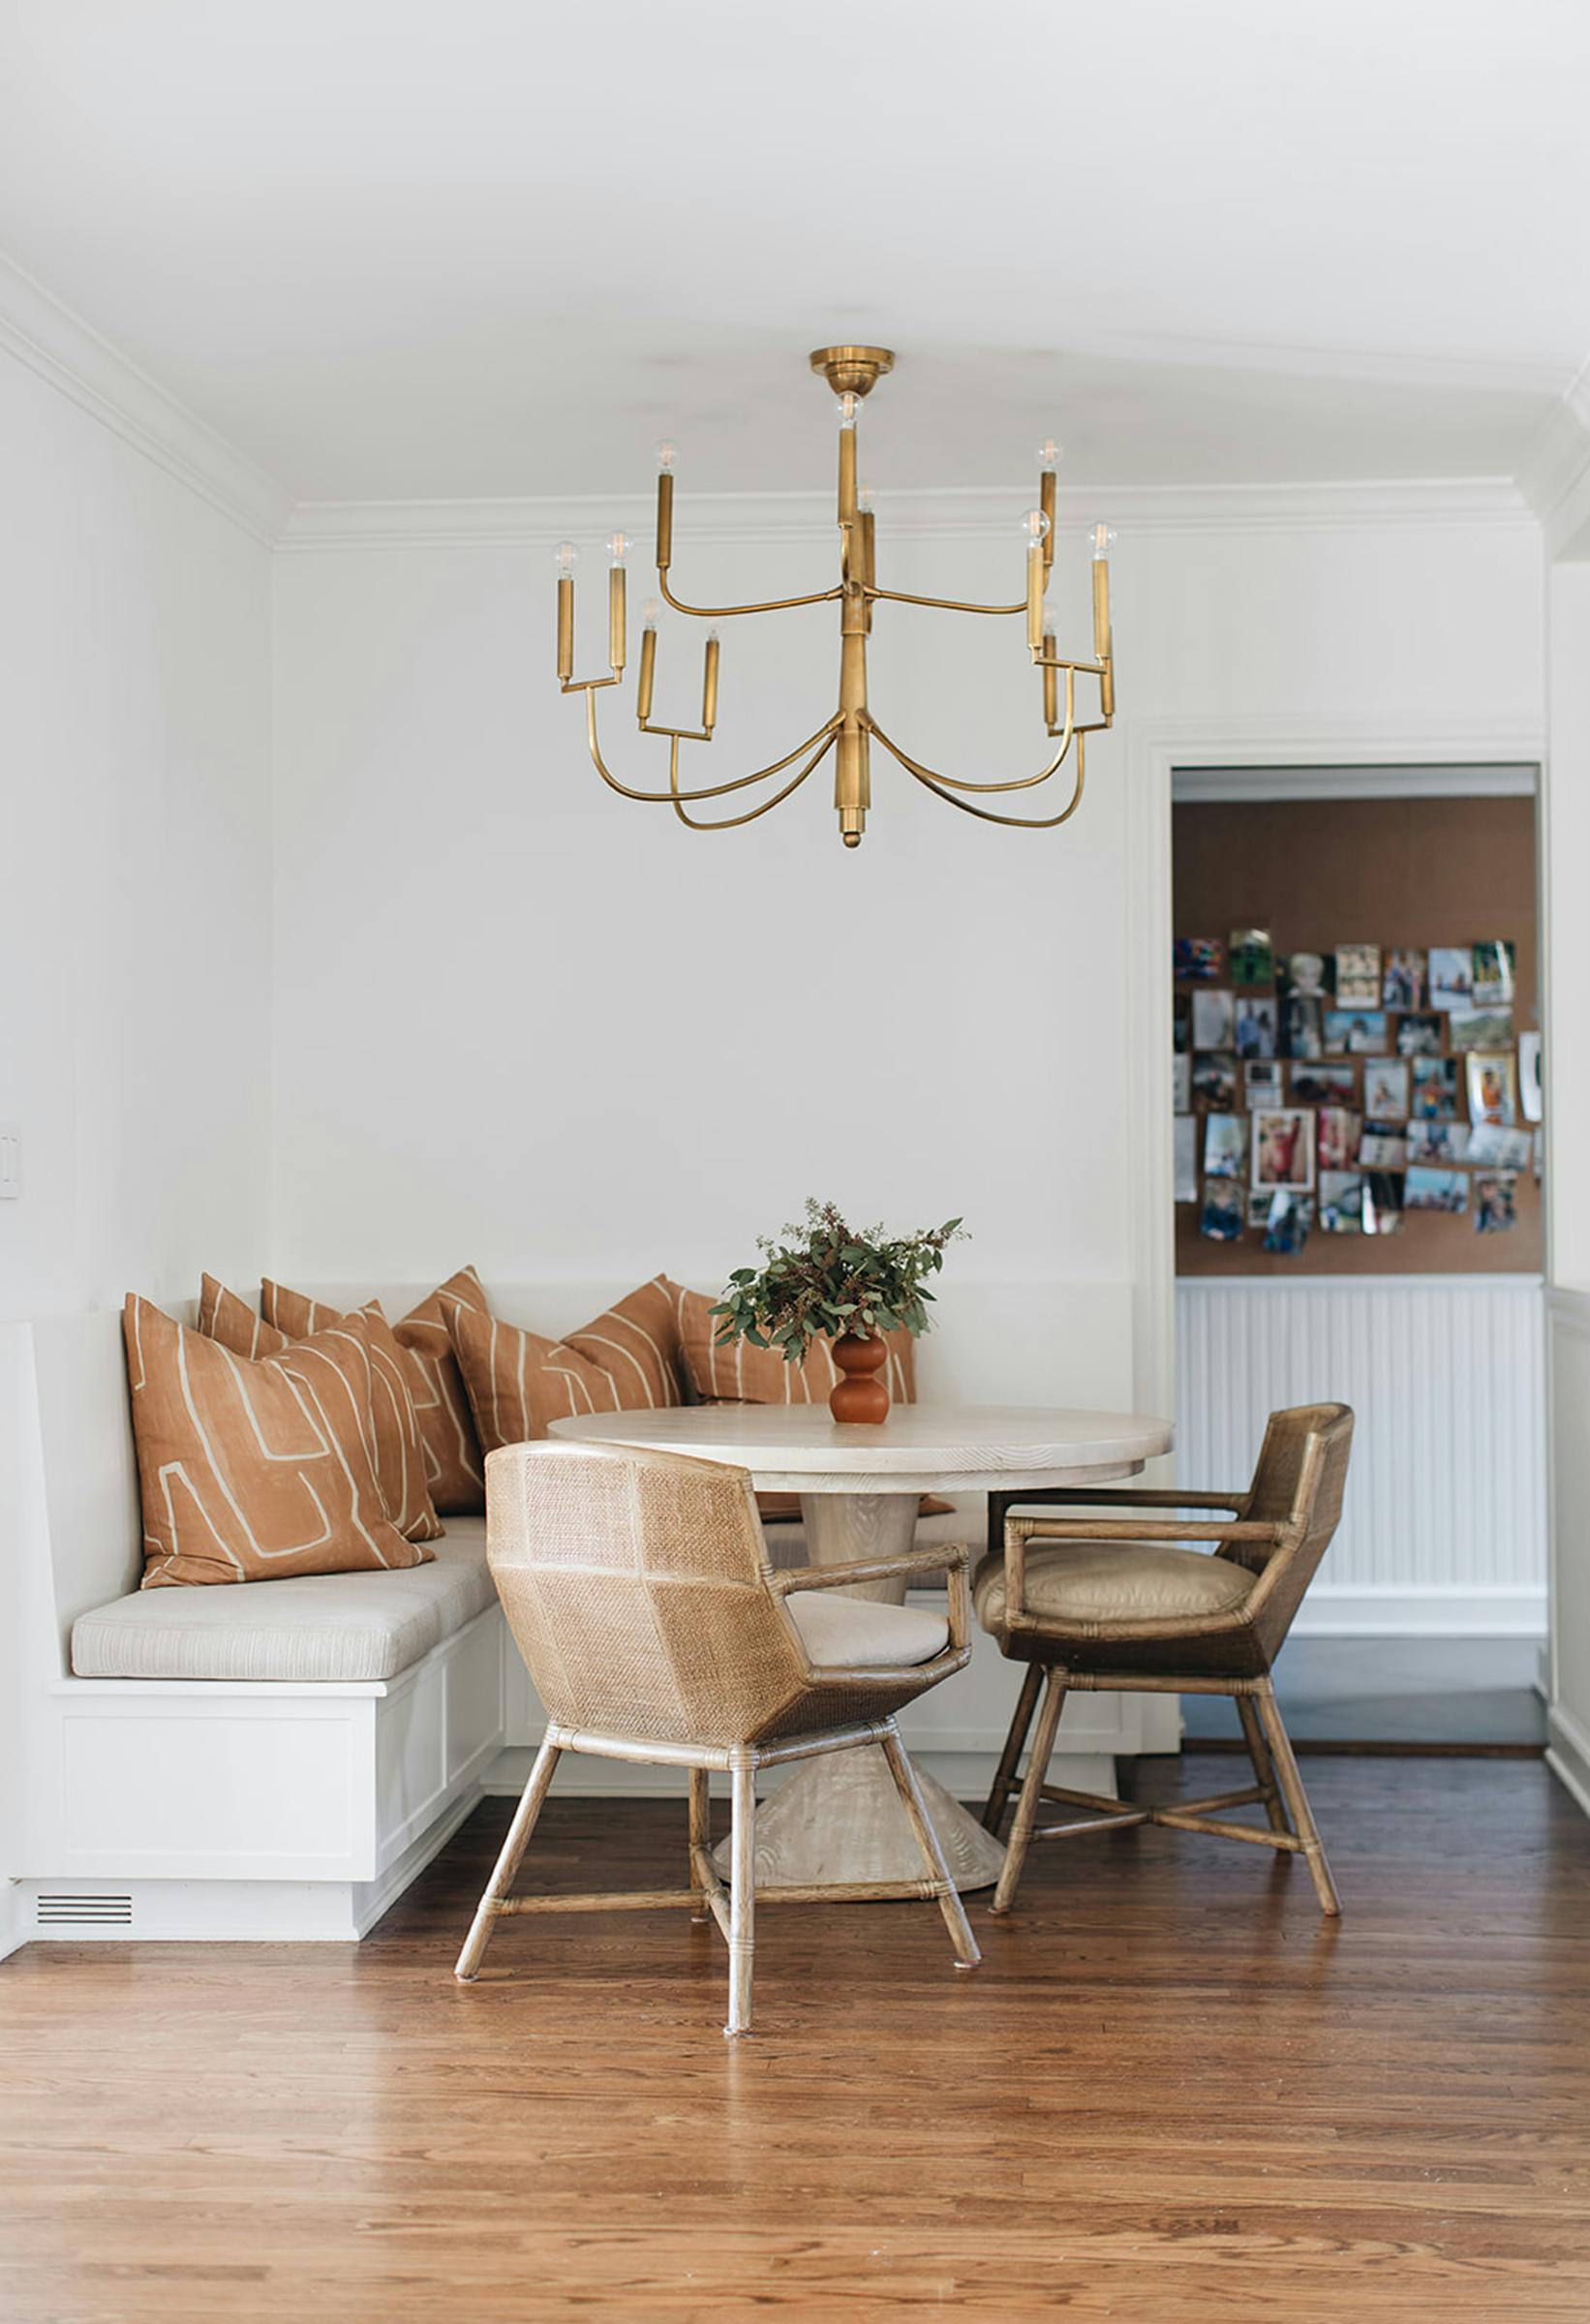 Nicole-Green-Design-Project-Chevy-Chase-Historic-East-Coast-Home-Breakfast-Nook